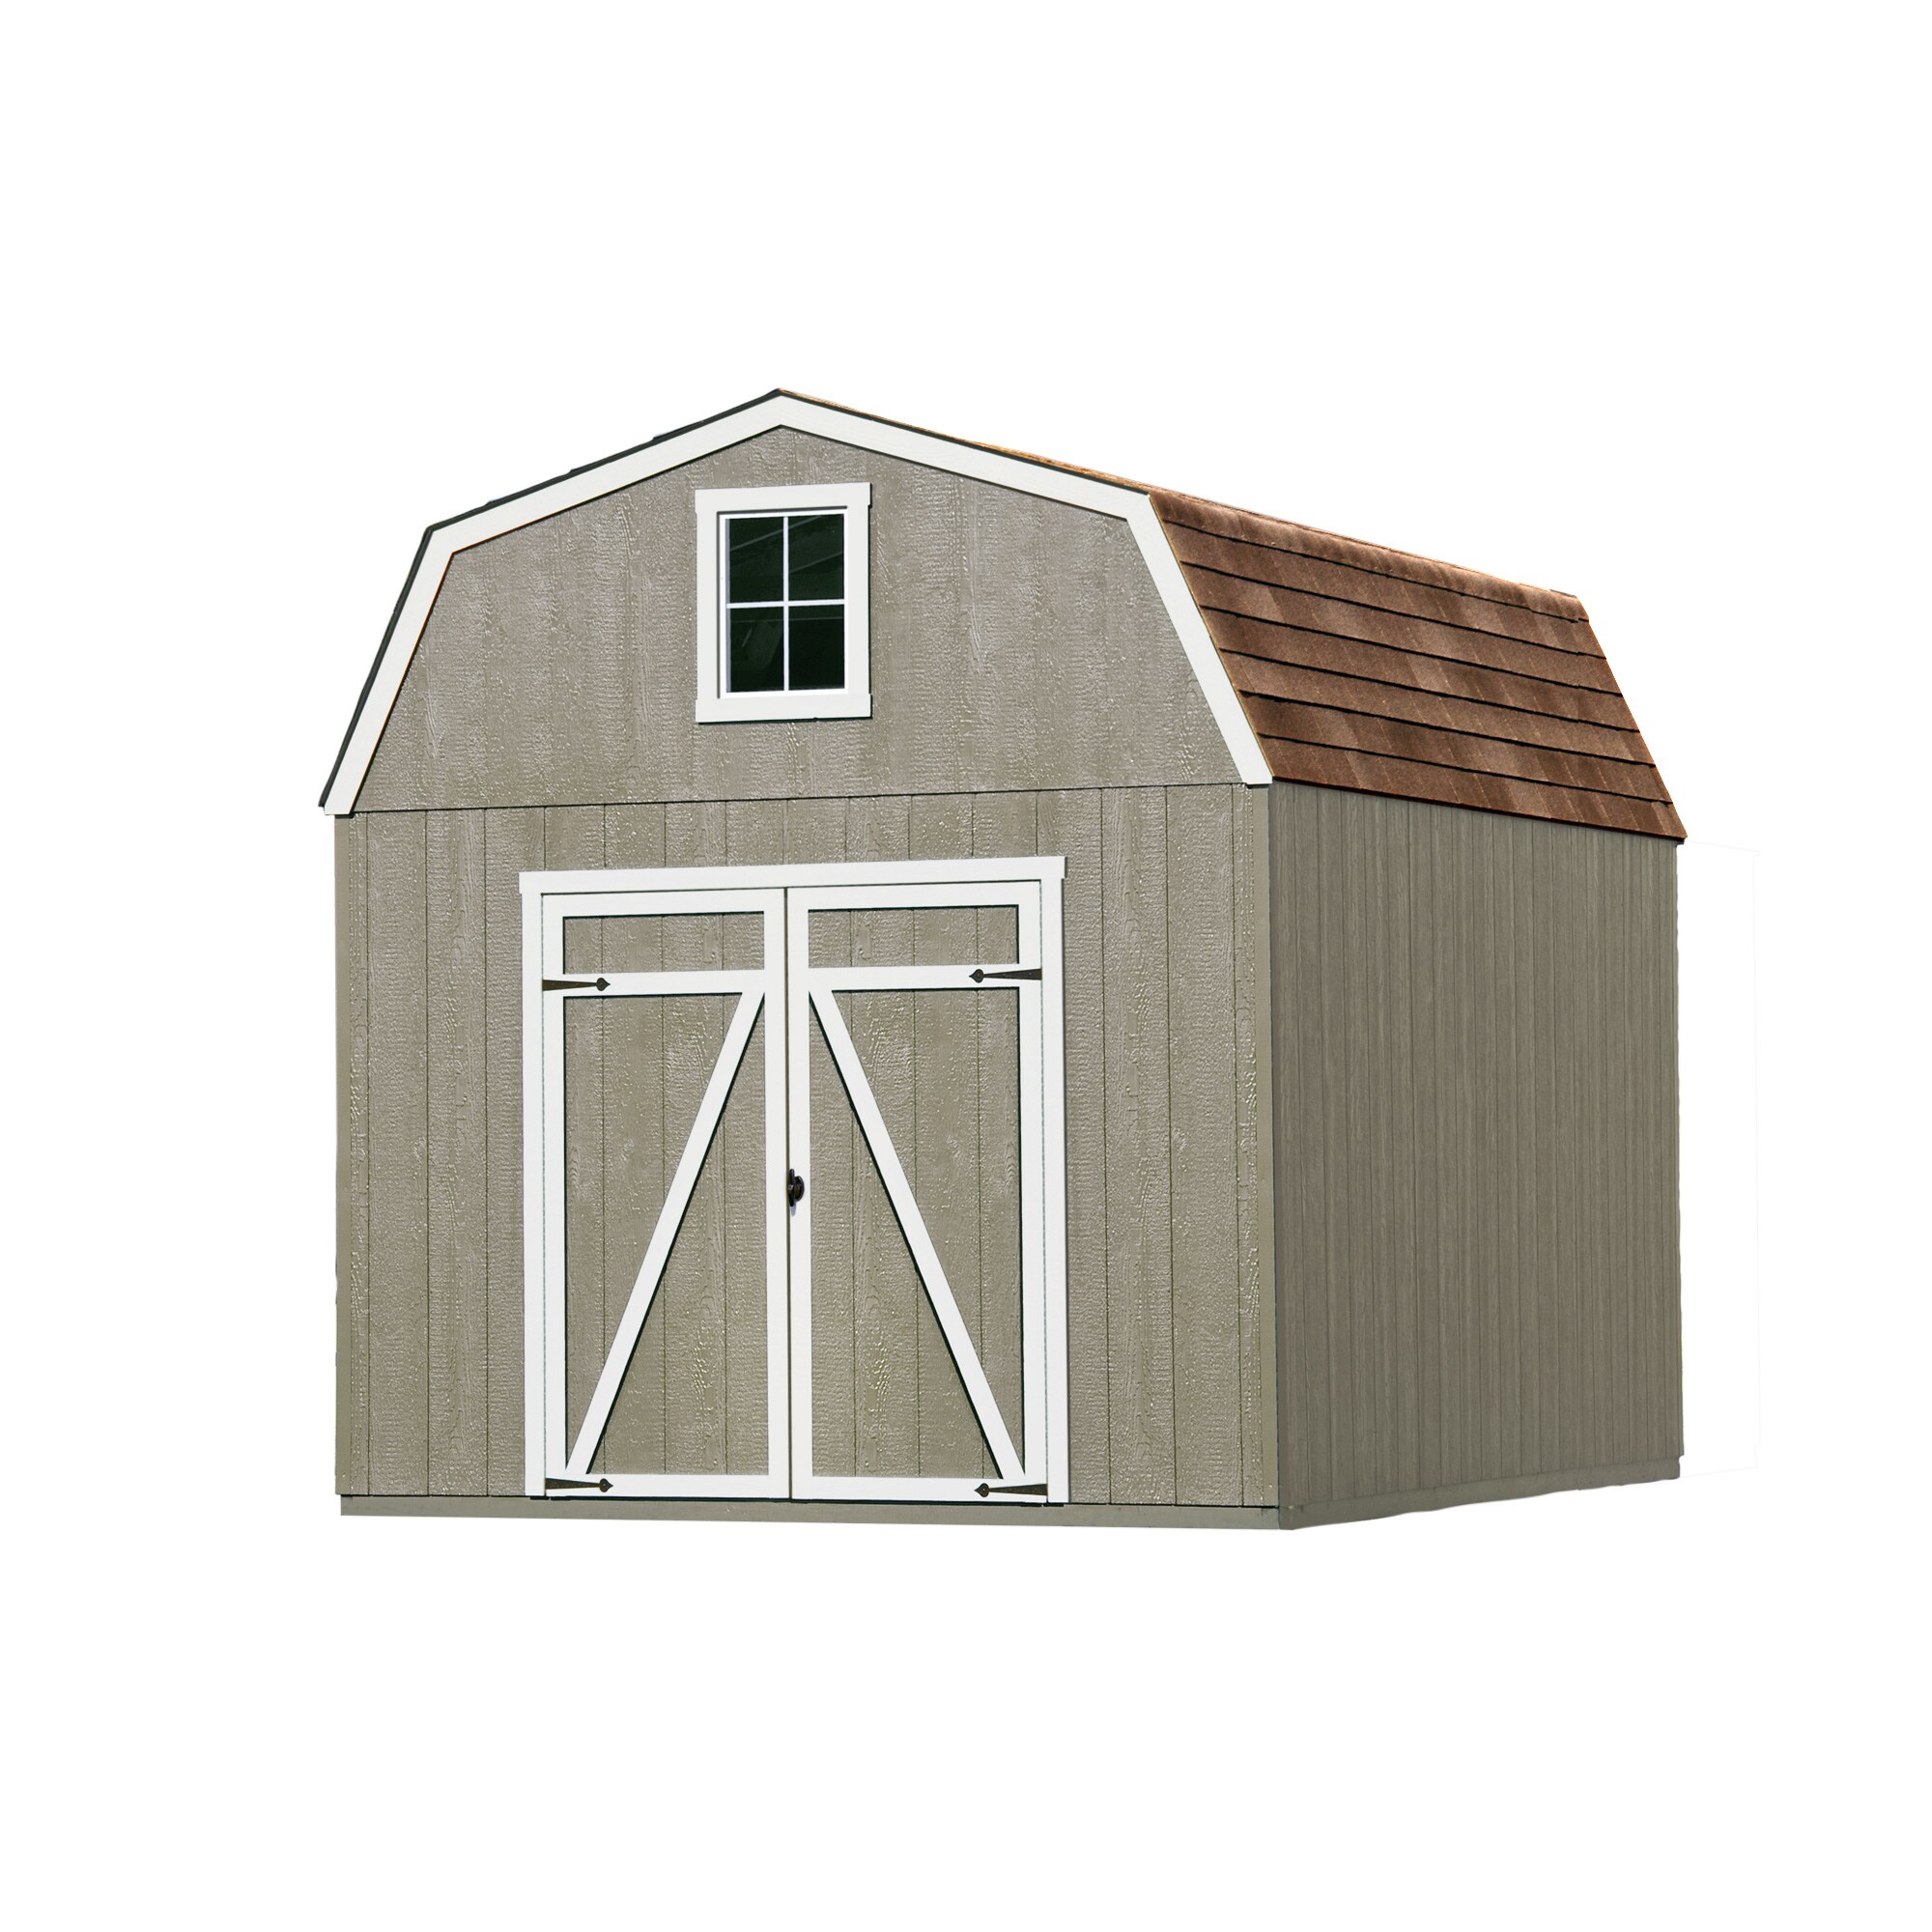 Heartland 10-ft x 12-ft Estate Gambrel Engineered Storage Shed 